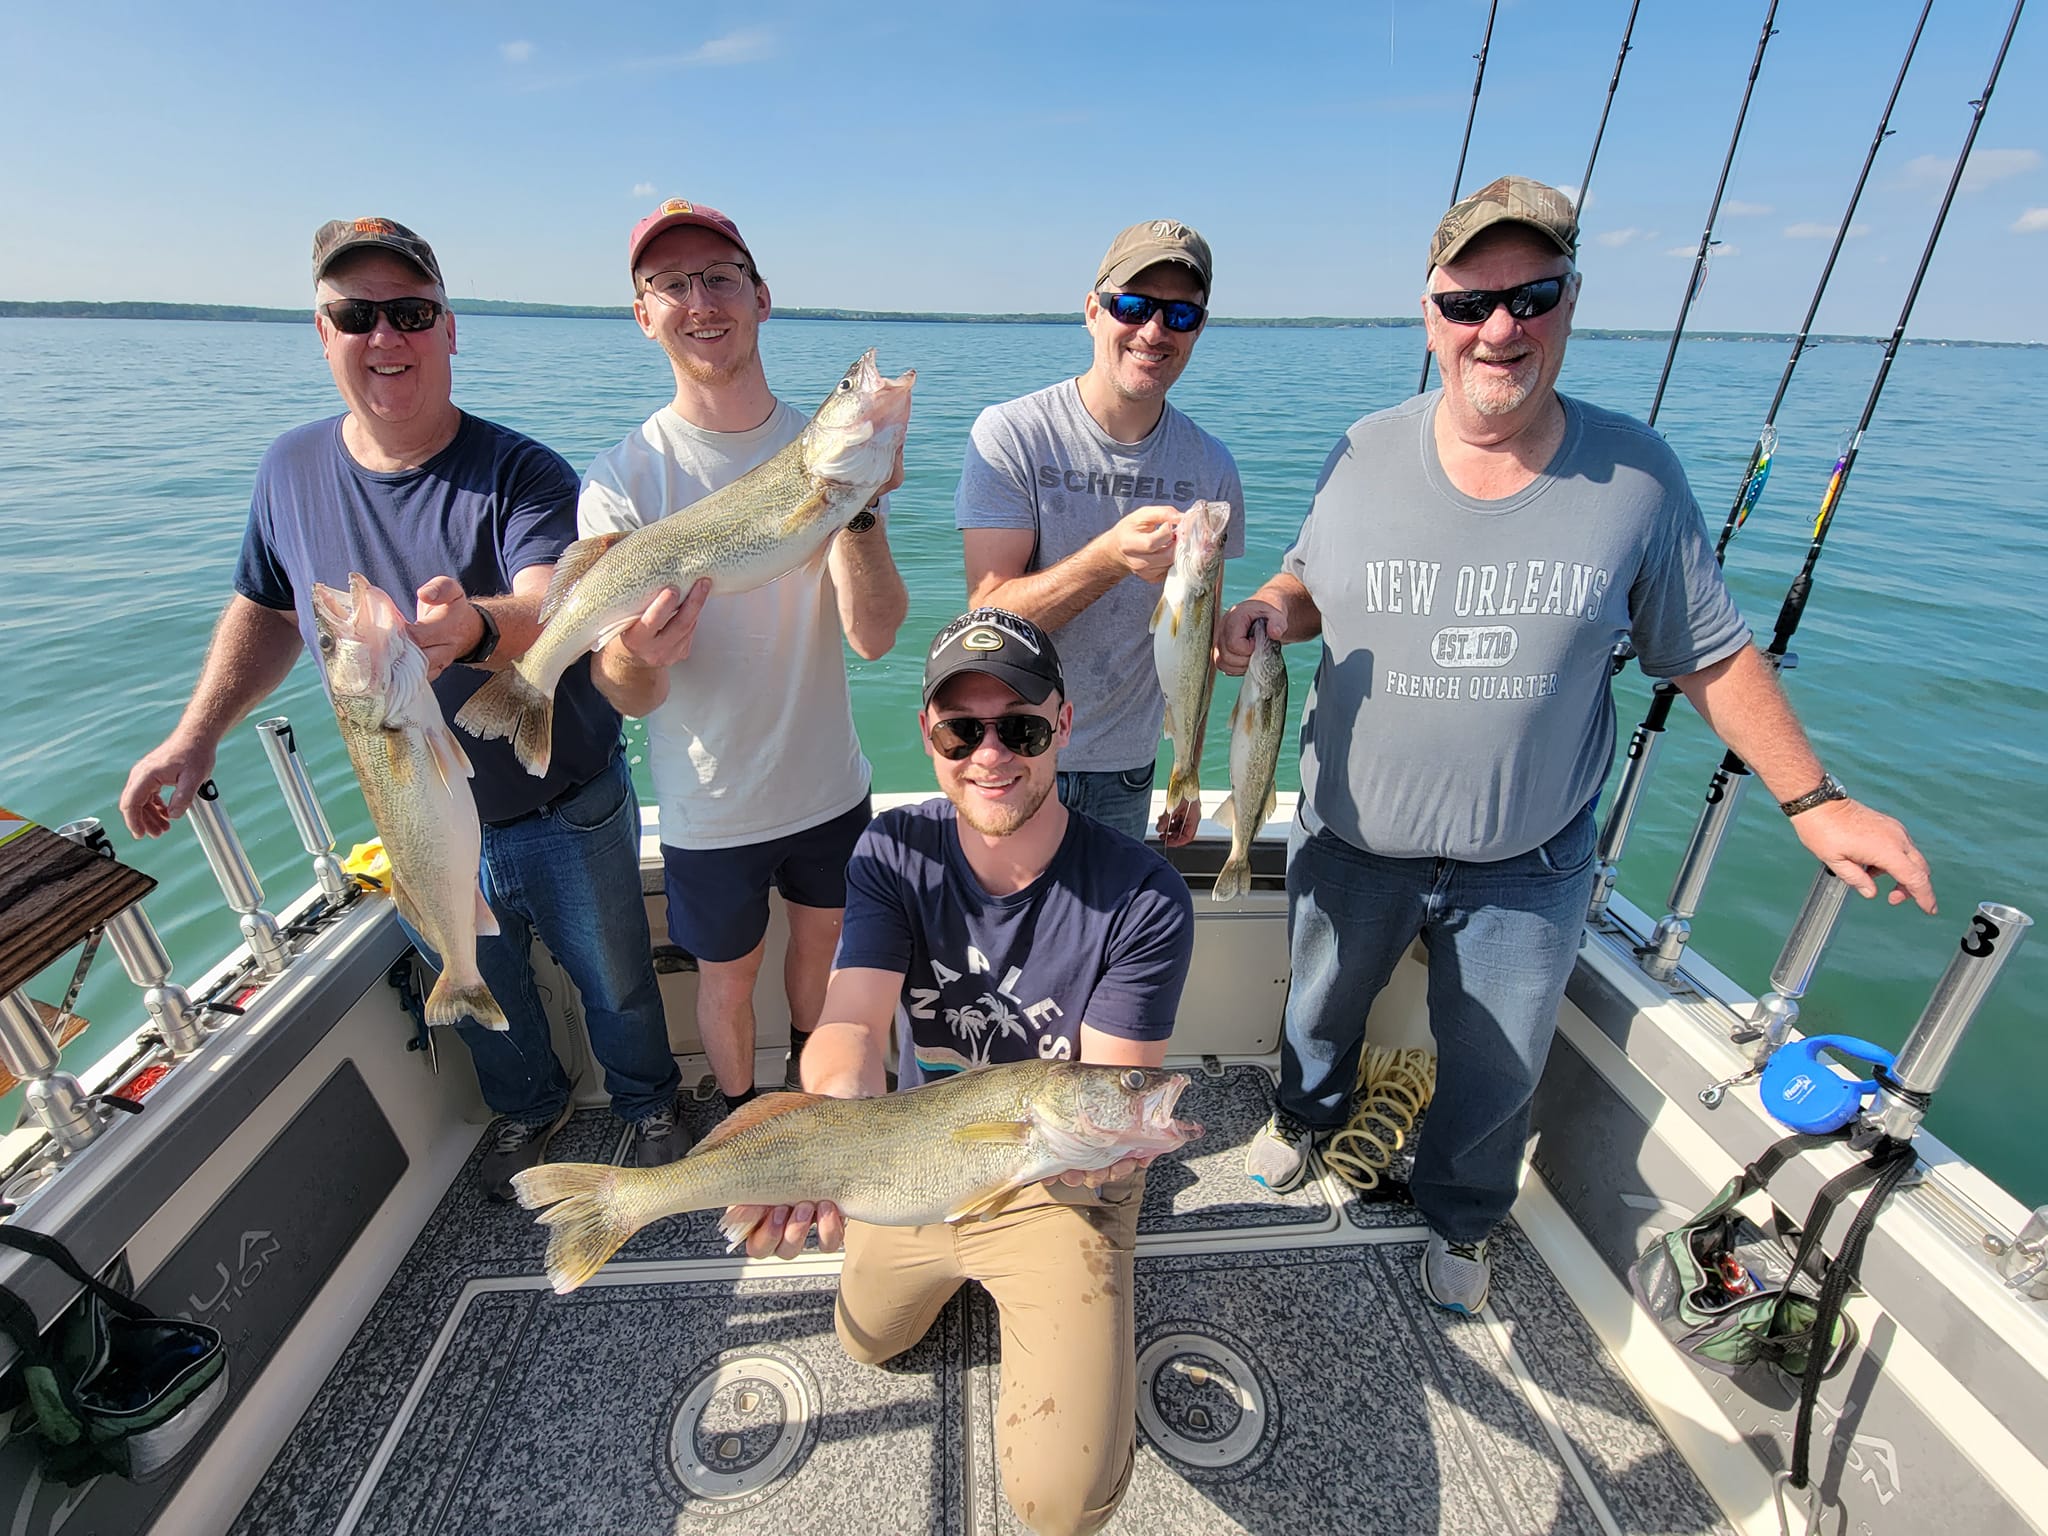 Lake Erie Walleye Fishing Report, Blue Dolphin Charters